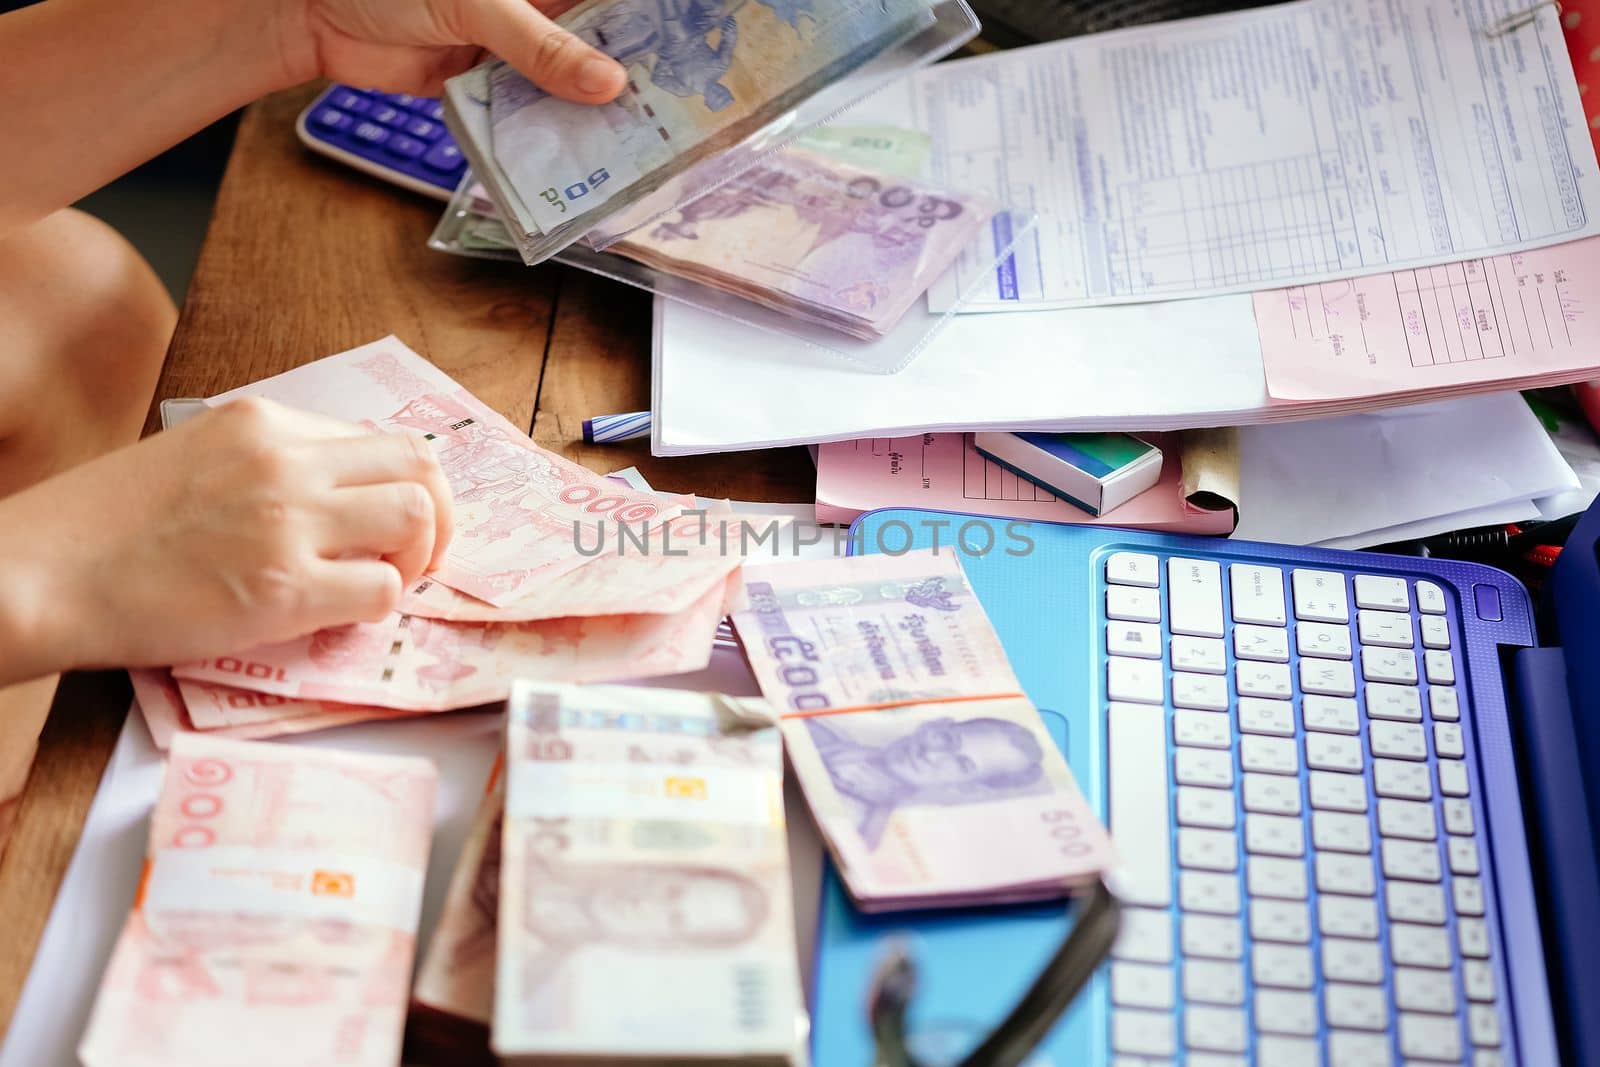 close up image of female hand count the money, business accounting background